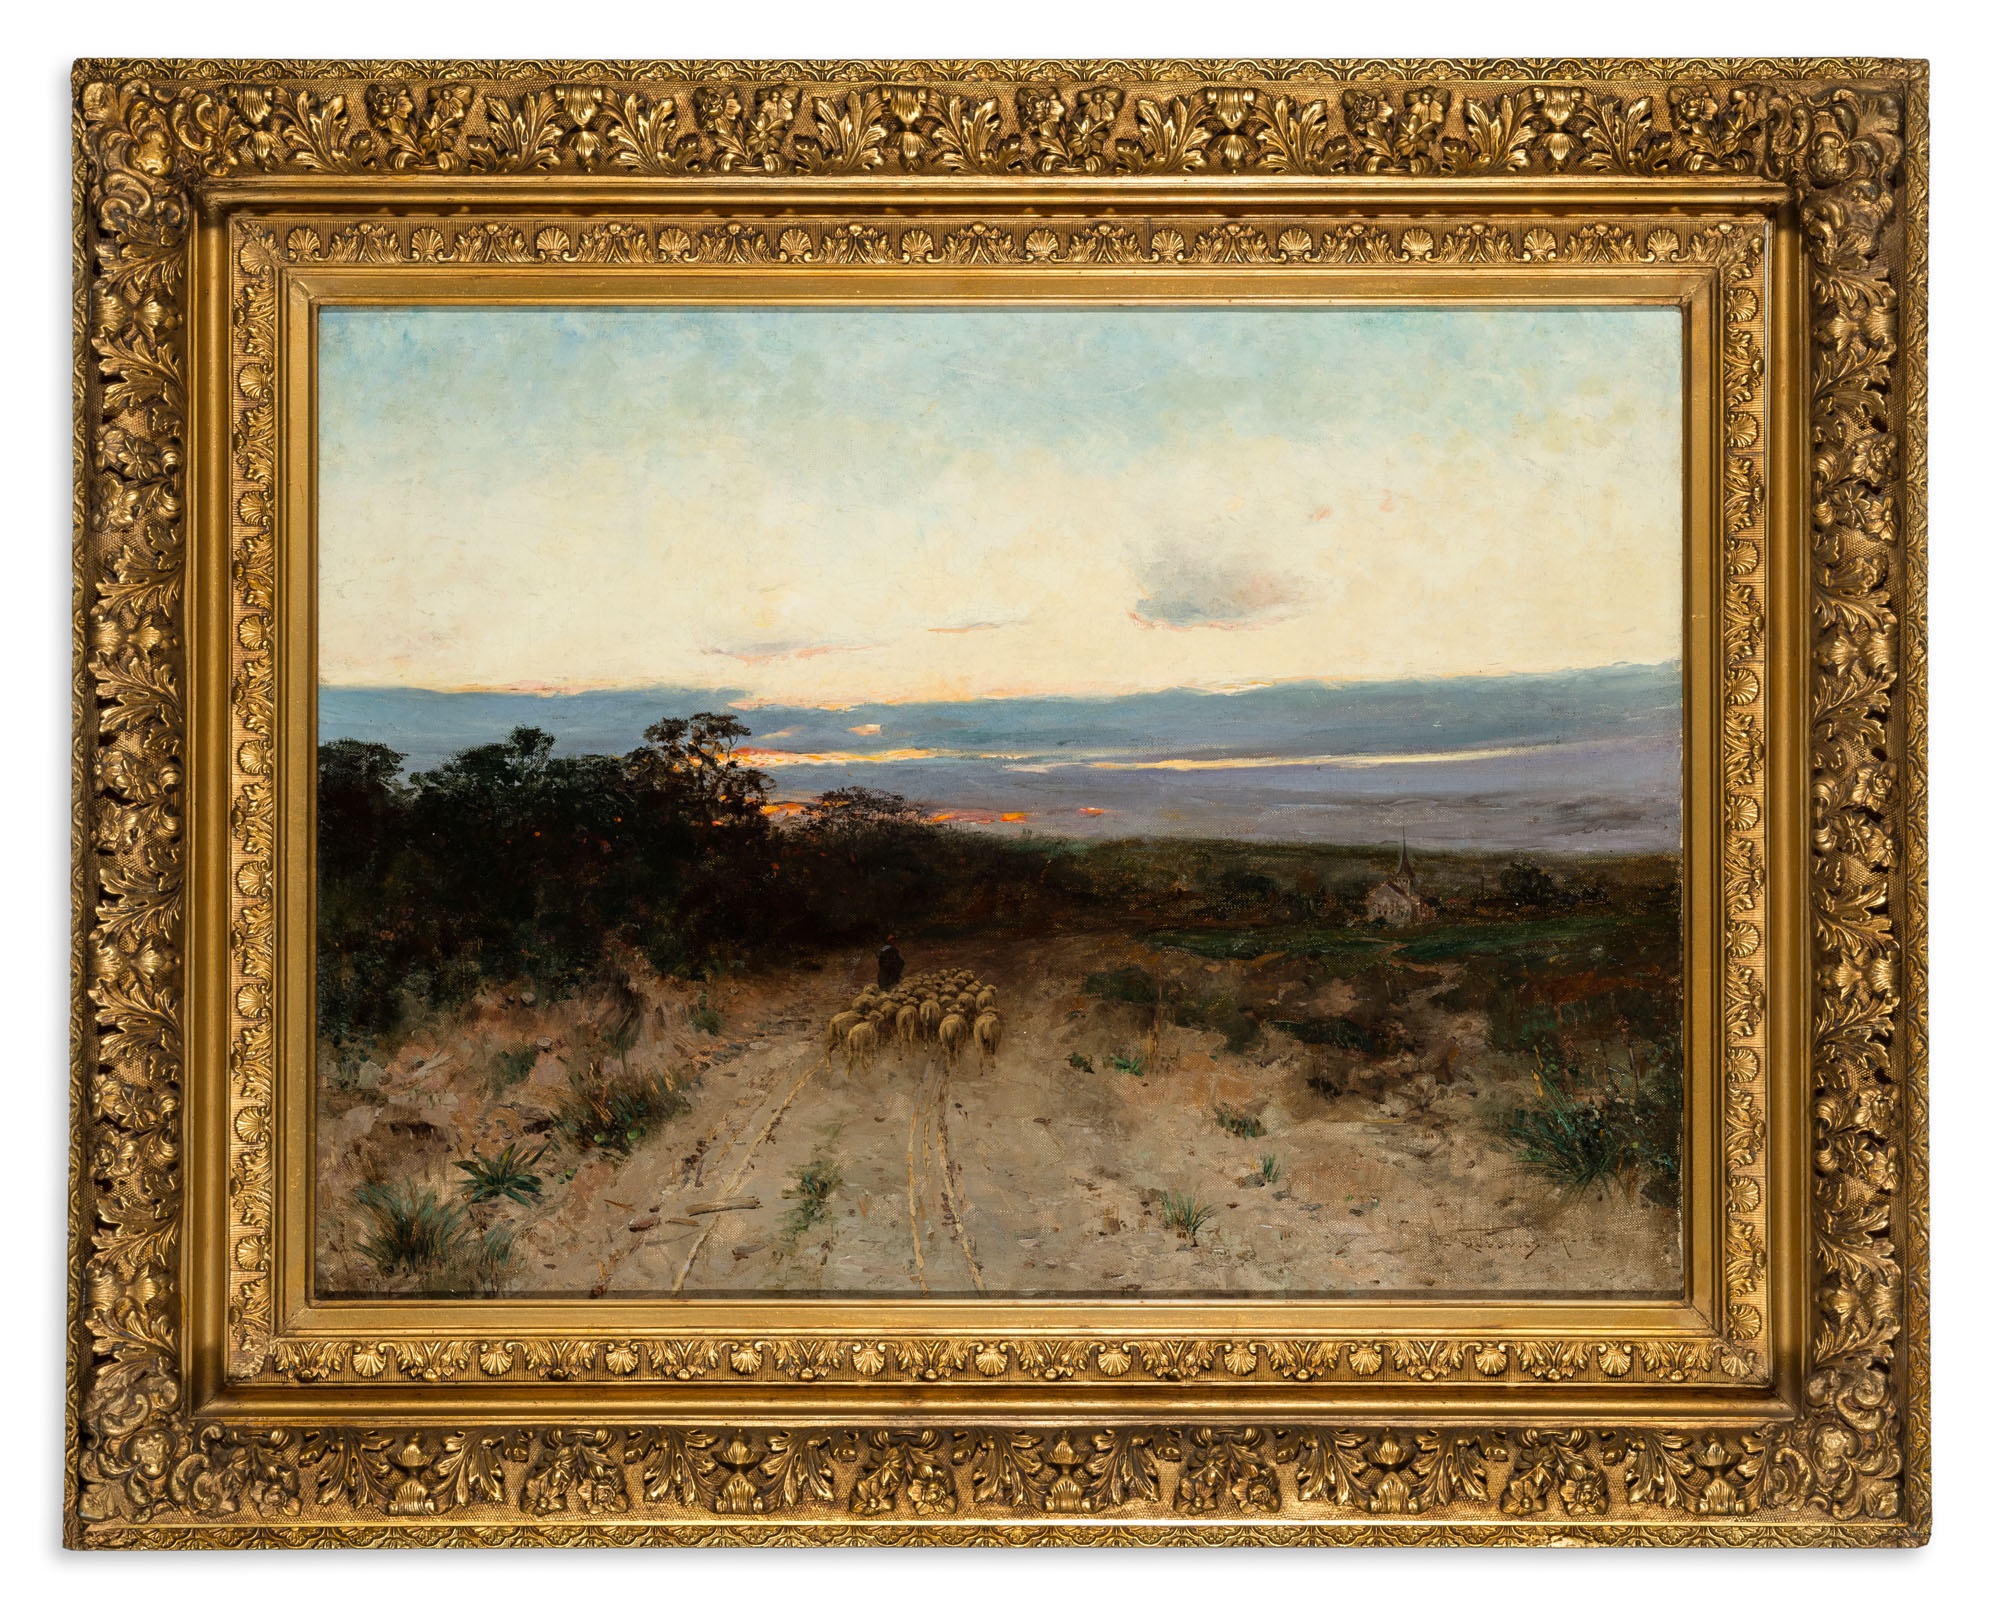 Márk Rubovics: untitled (landscape with shepherd at sunset), (known as “Landscape with Shepherd Heading Home”) (The Salgo Trust for Education CC BY-NC-SA)